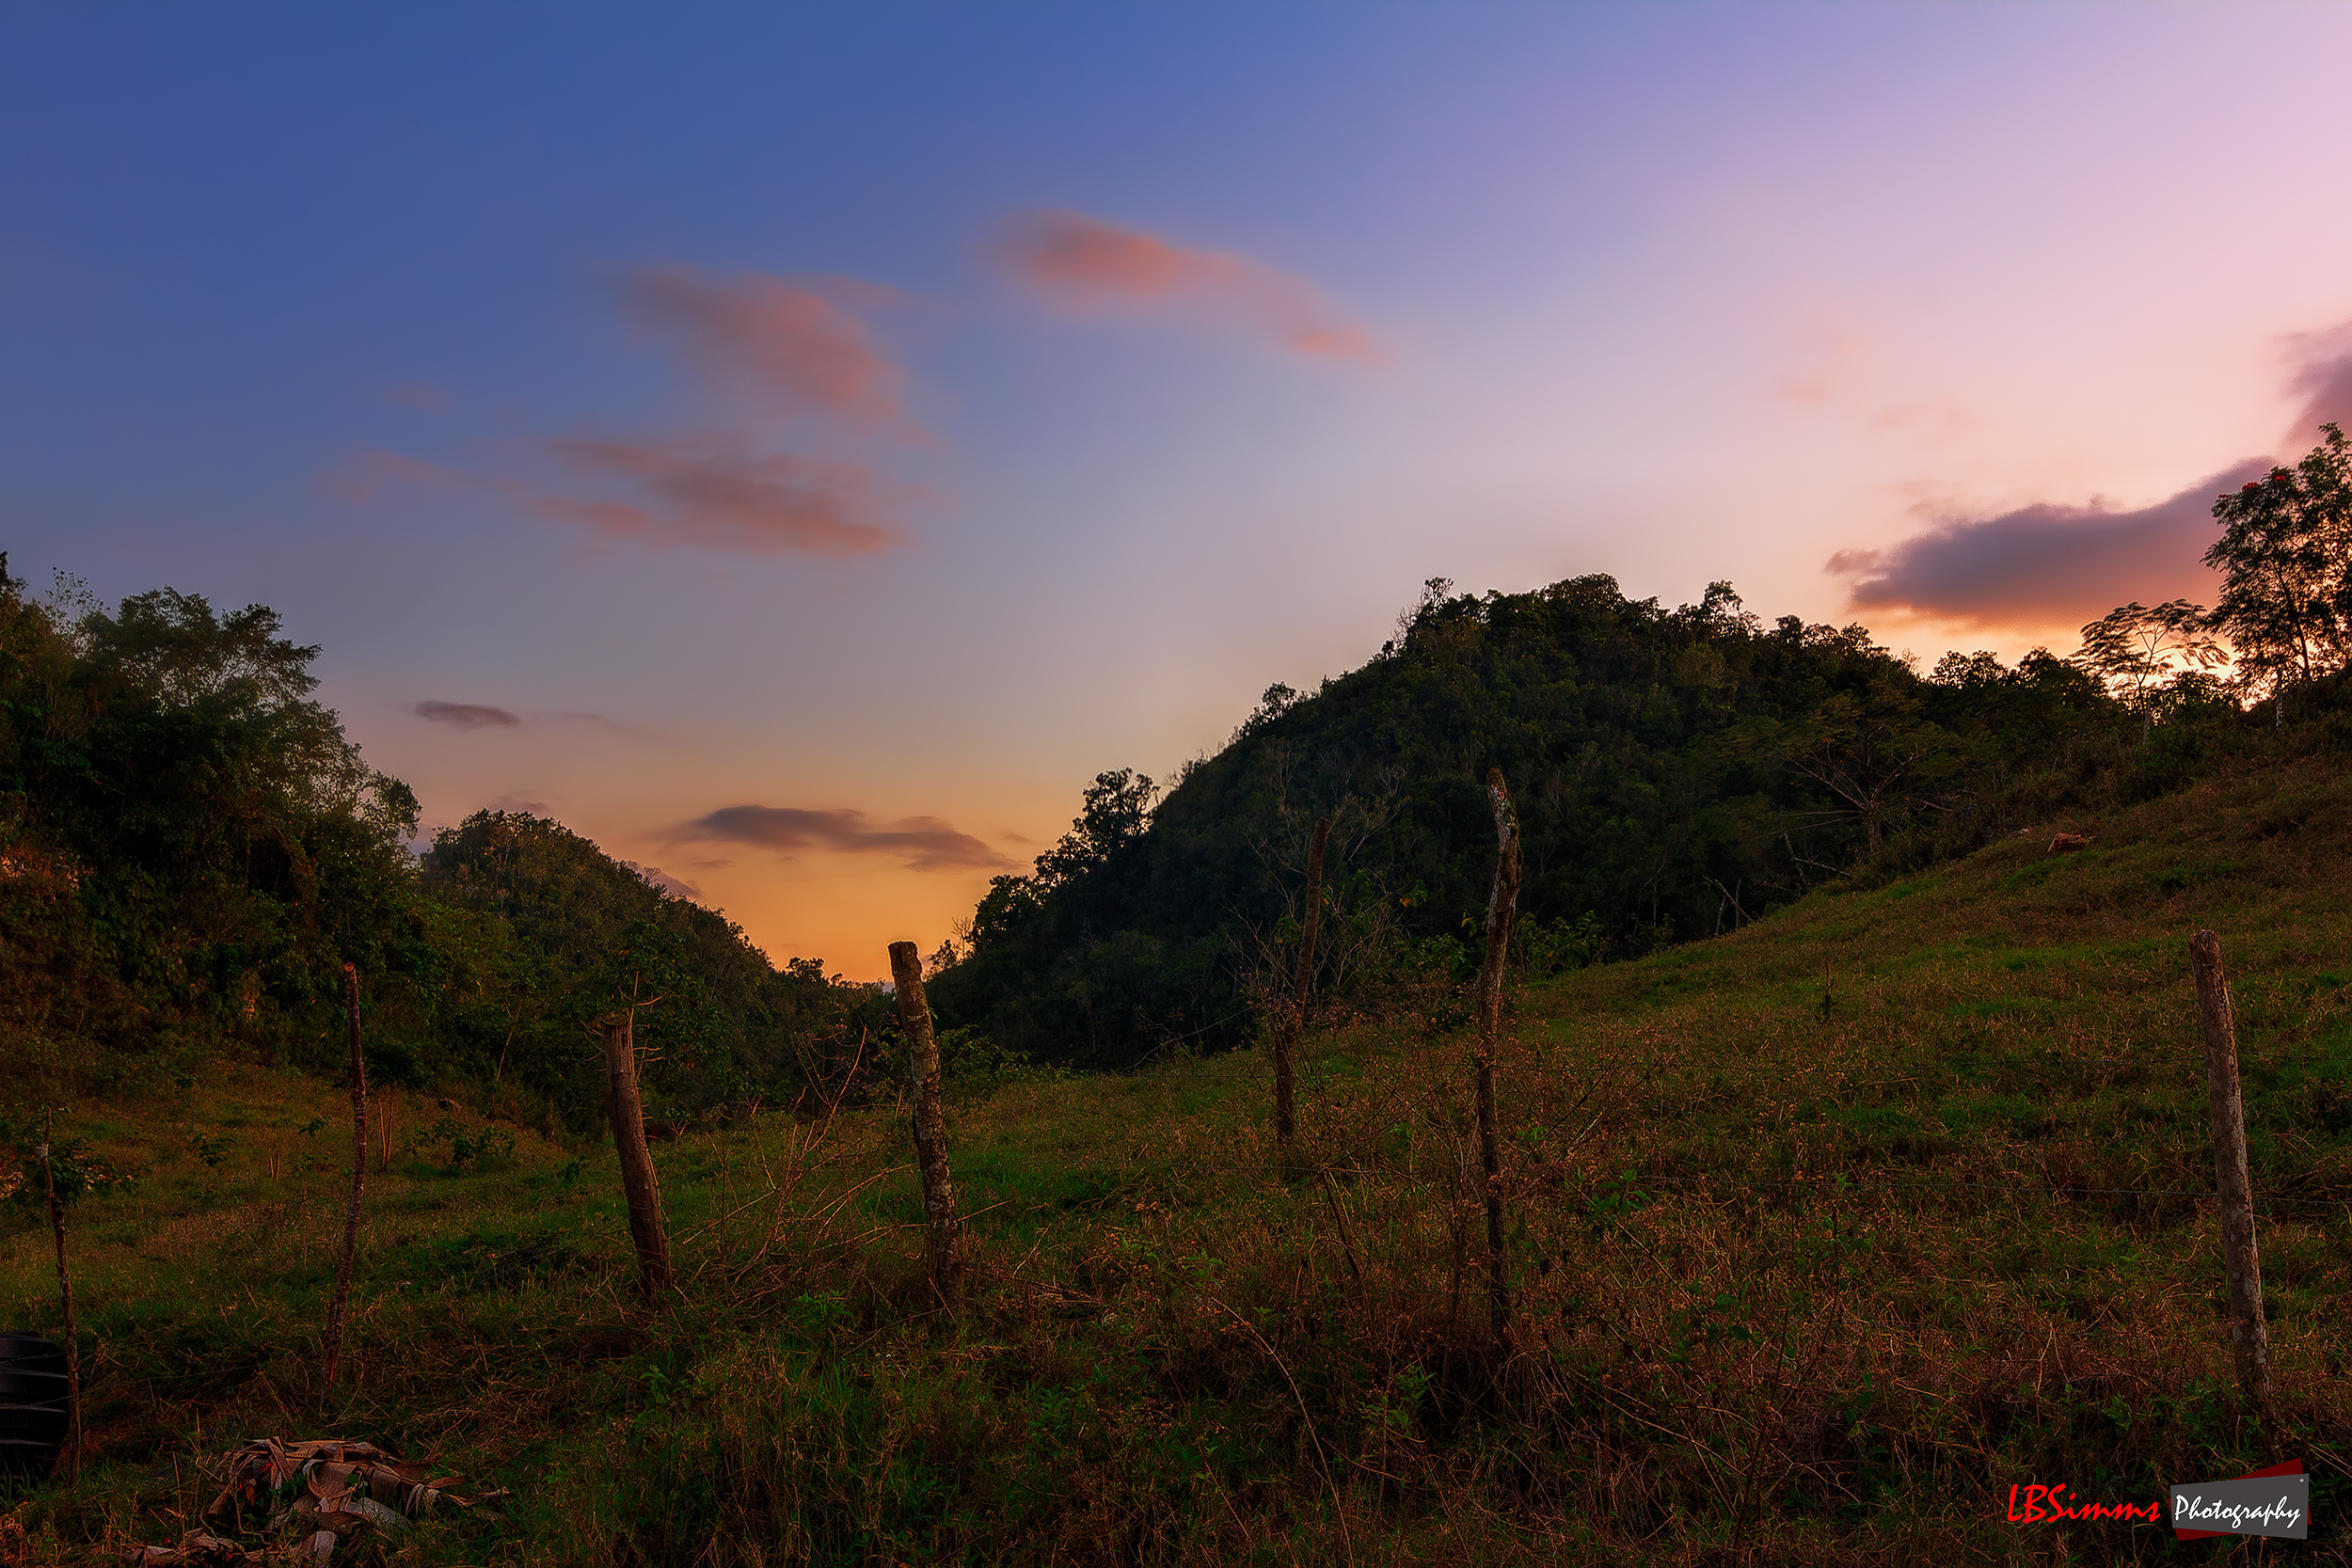 Sunset in the hills of Linton Park, St Ann, Jamaica